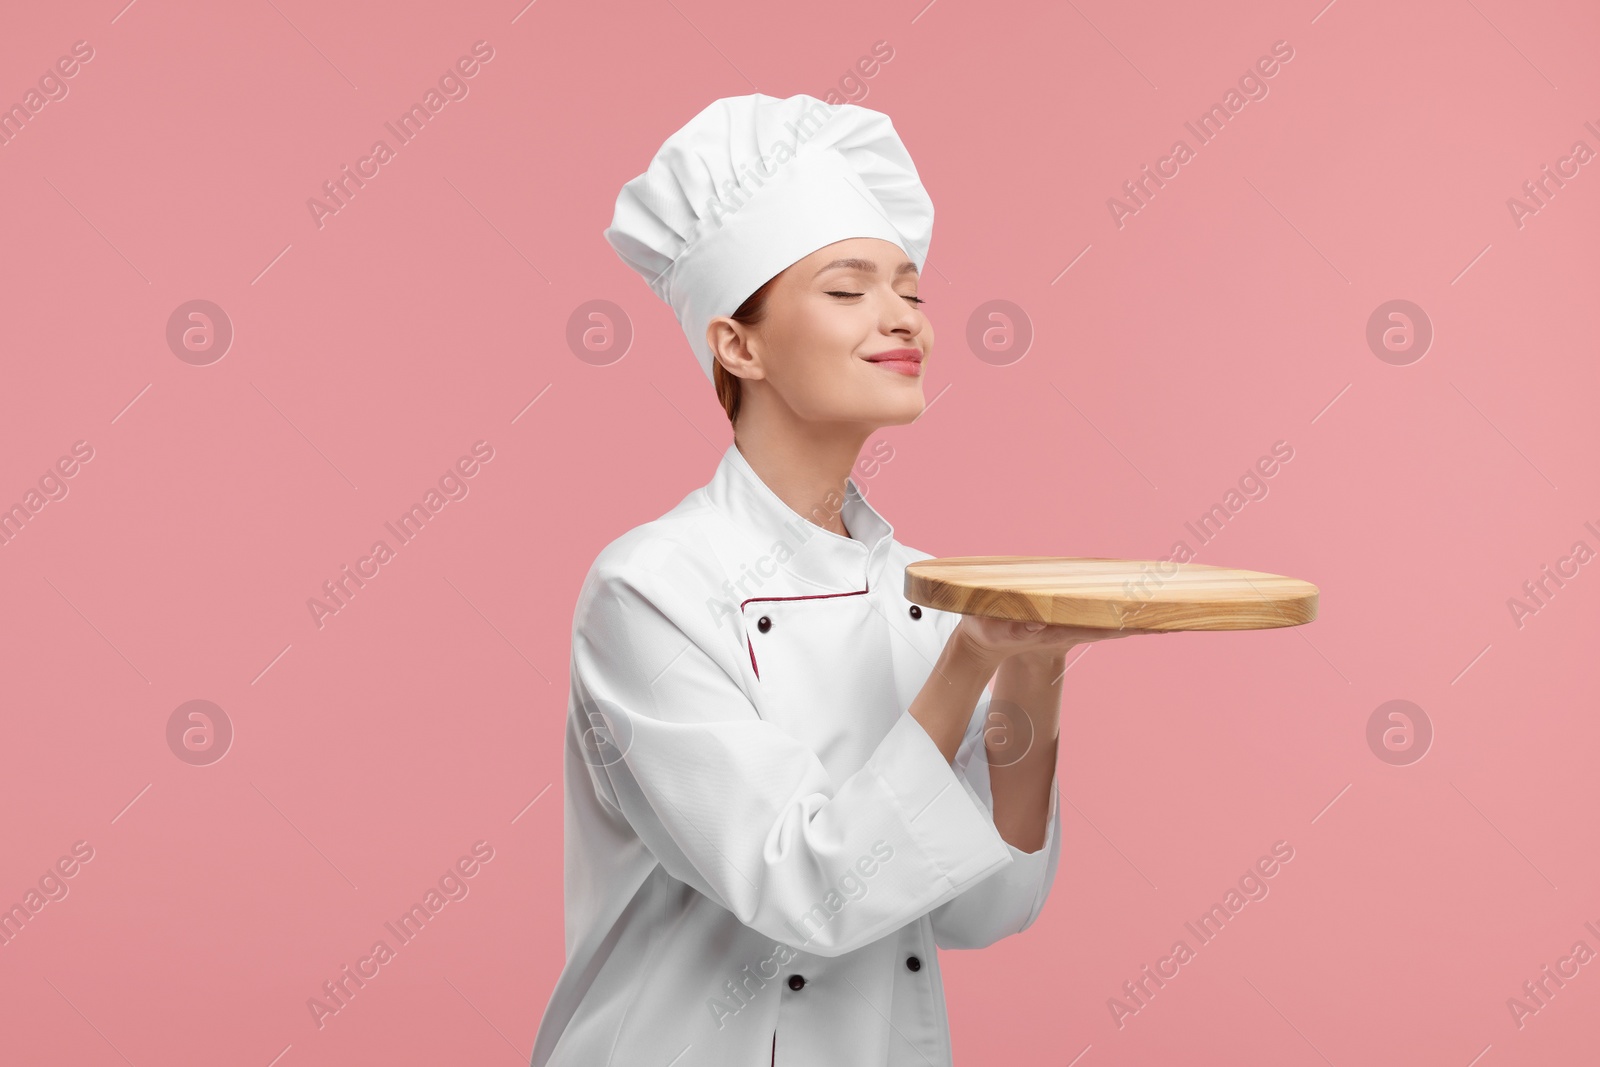 Photo of Young chef in uniform holding empty wooden board on pink background